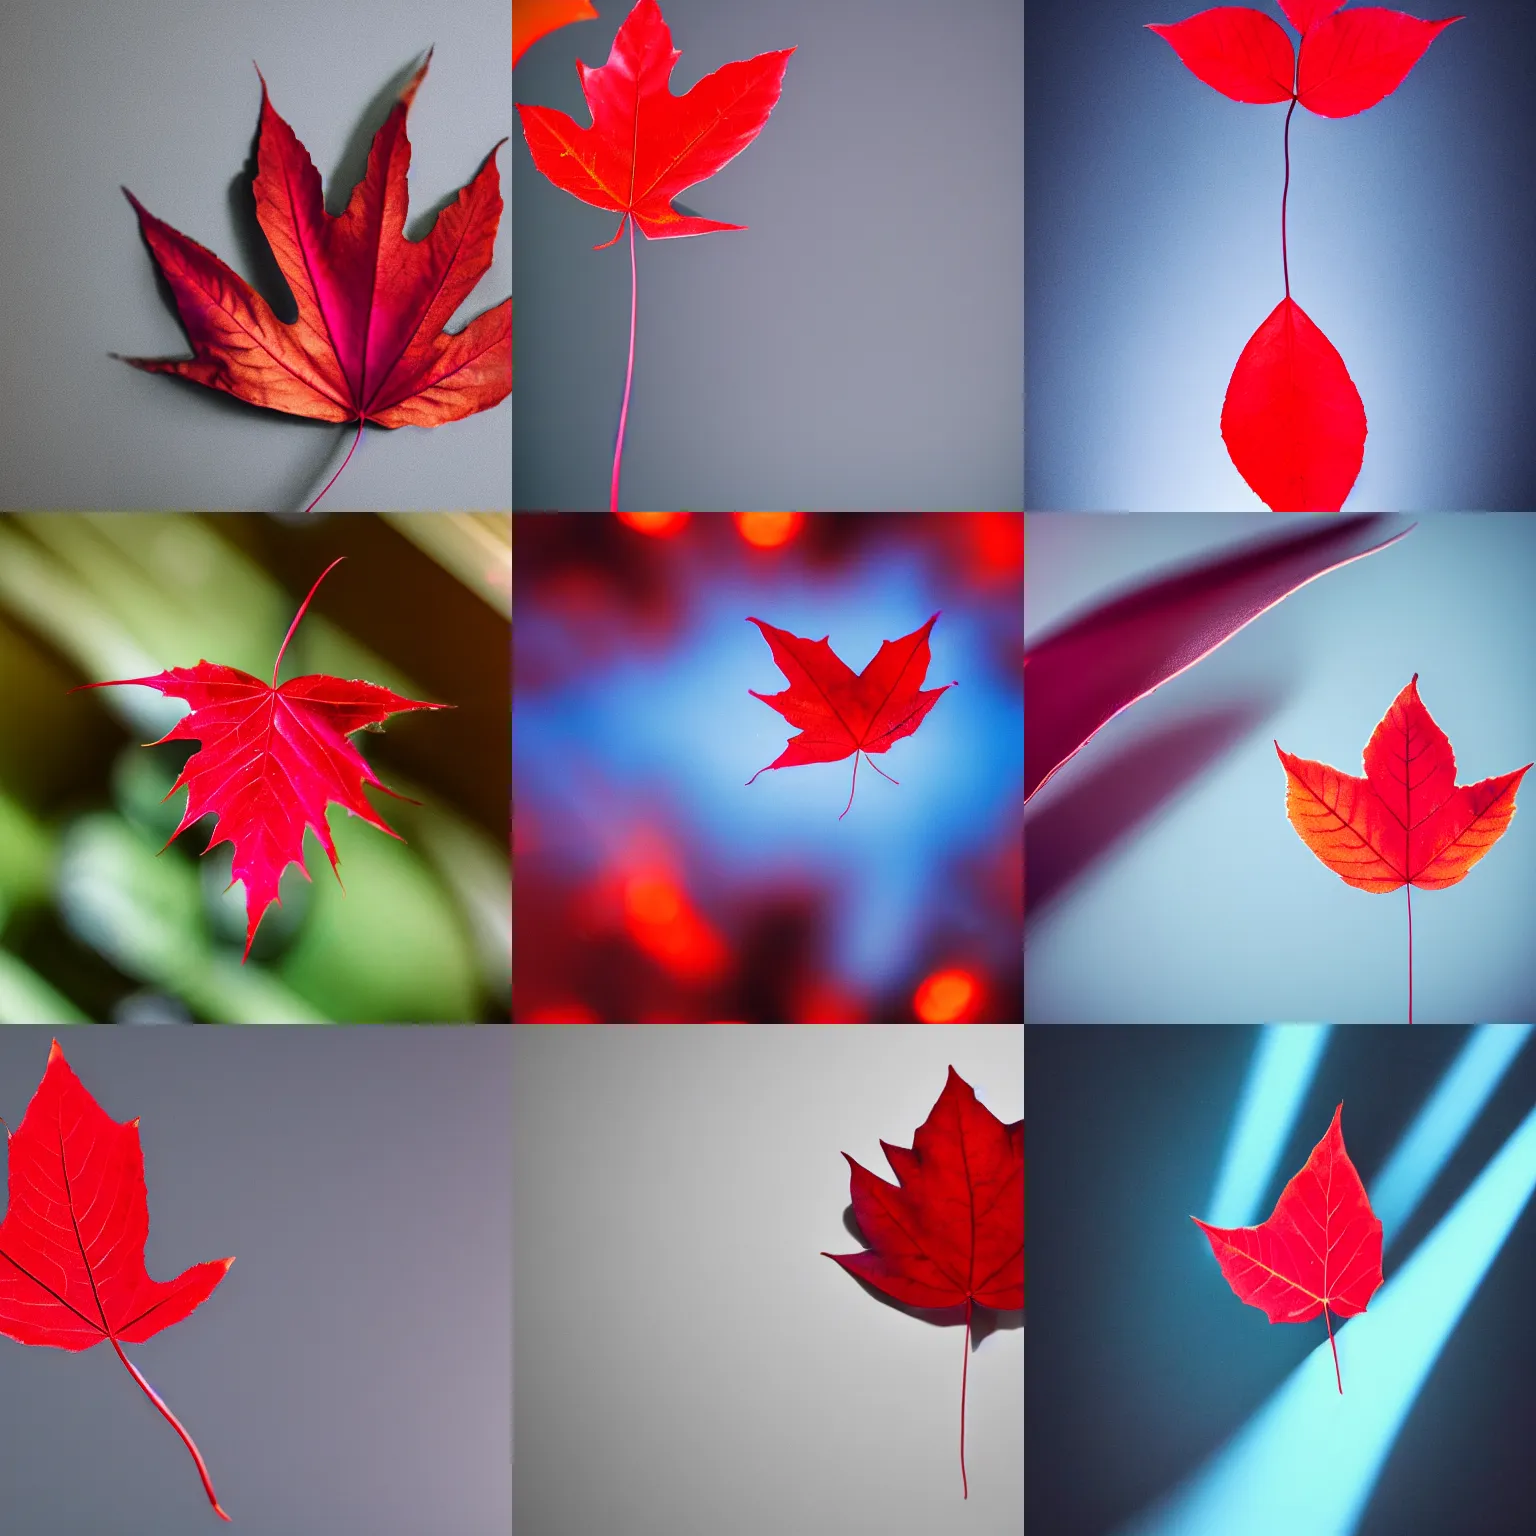 Prompt: A studio photograph of a red leaf above a bright blue light shining through, XF IQ4, 150MP, 50mm, F1.4, ISO 200, 1/160s, natural light, Adobe Lightroom, photolab, Affinity Photo, PhotoDirector 365, 4k, trending on Artstation, award-winning